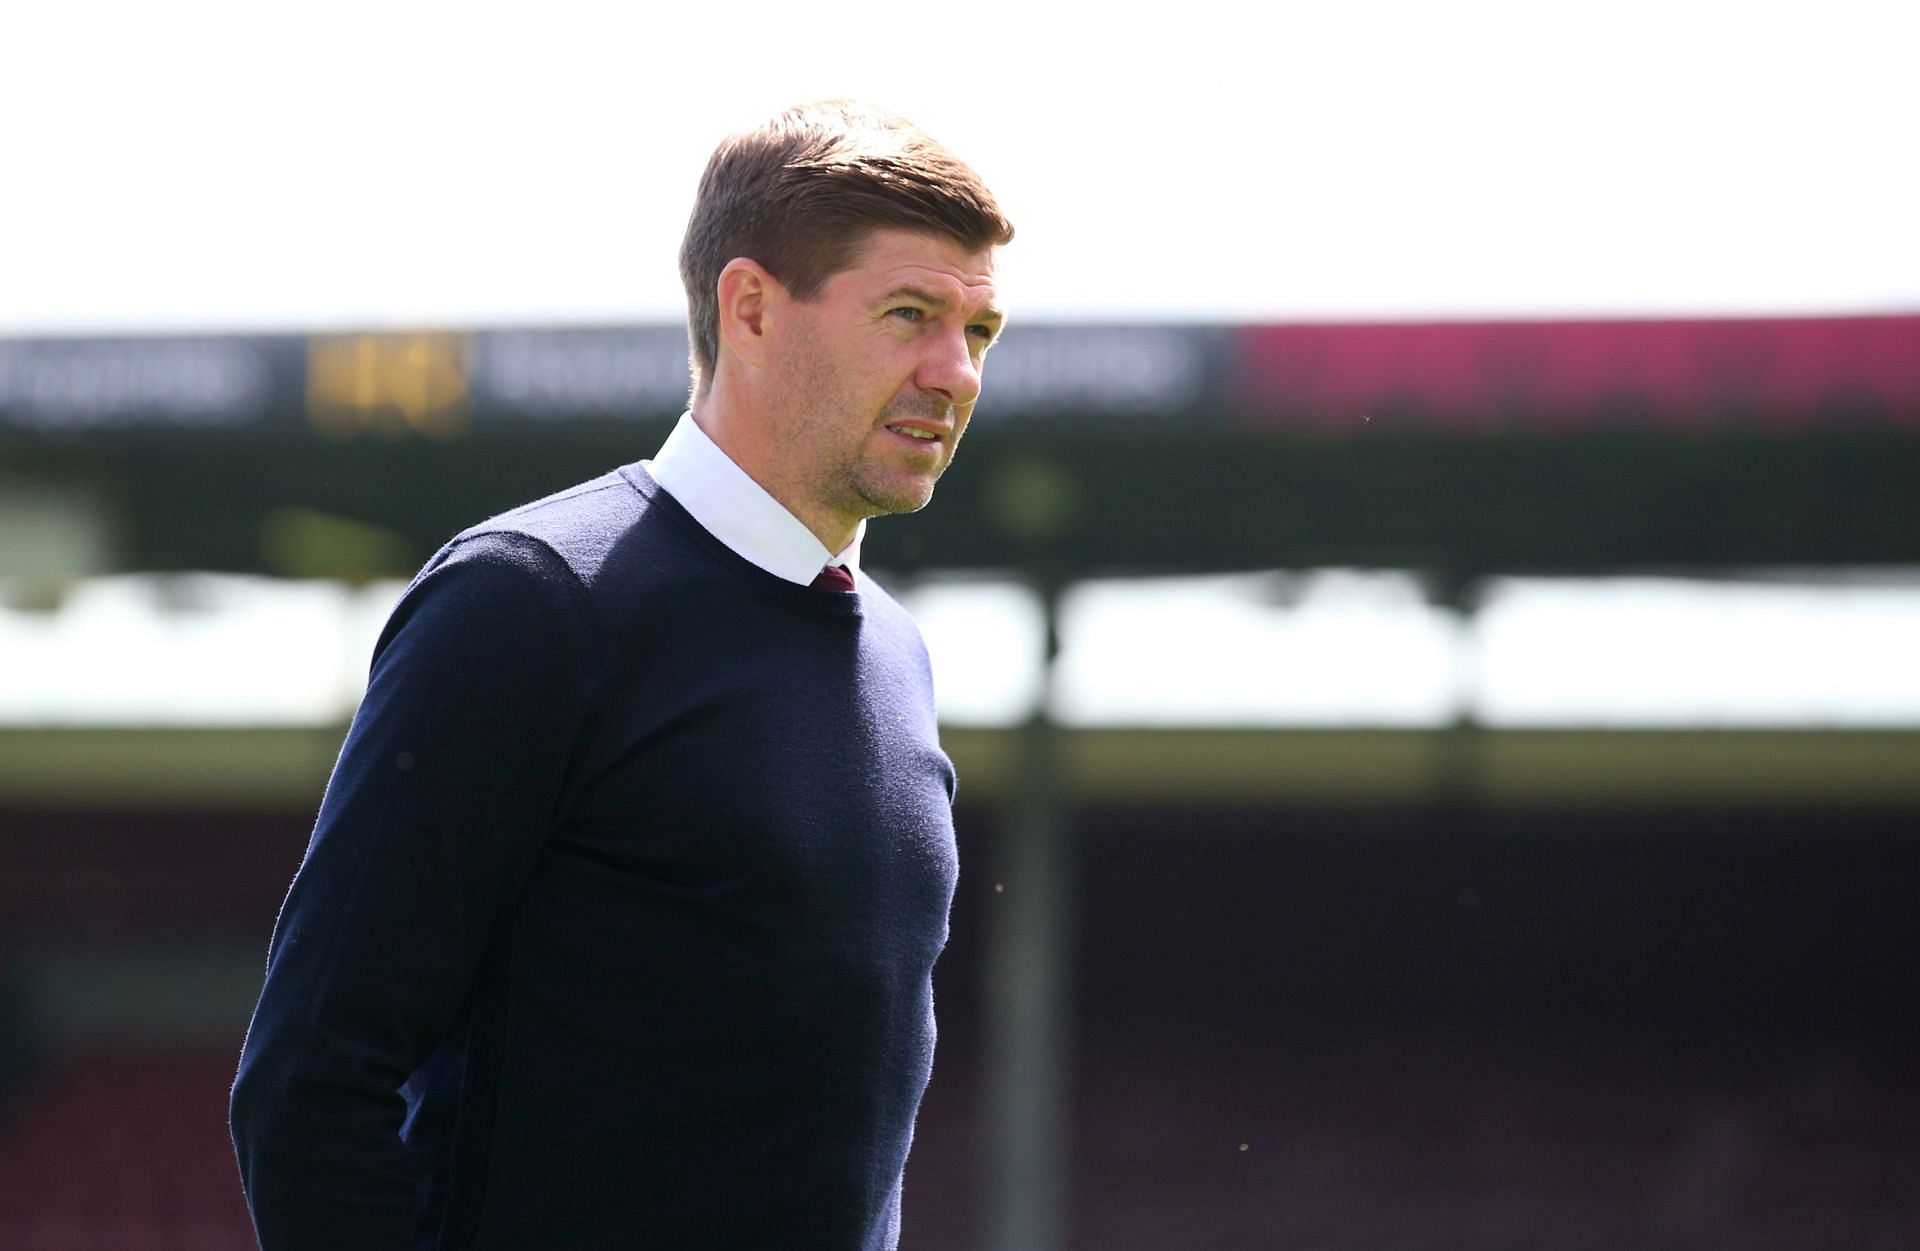 Steven Gerrard showed interest in signing a number of Liverpool players